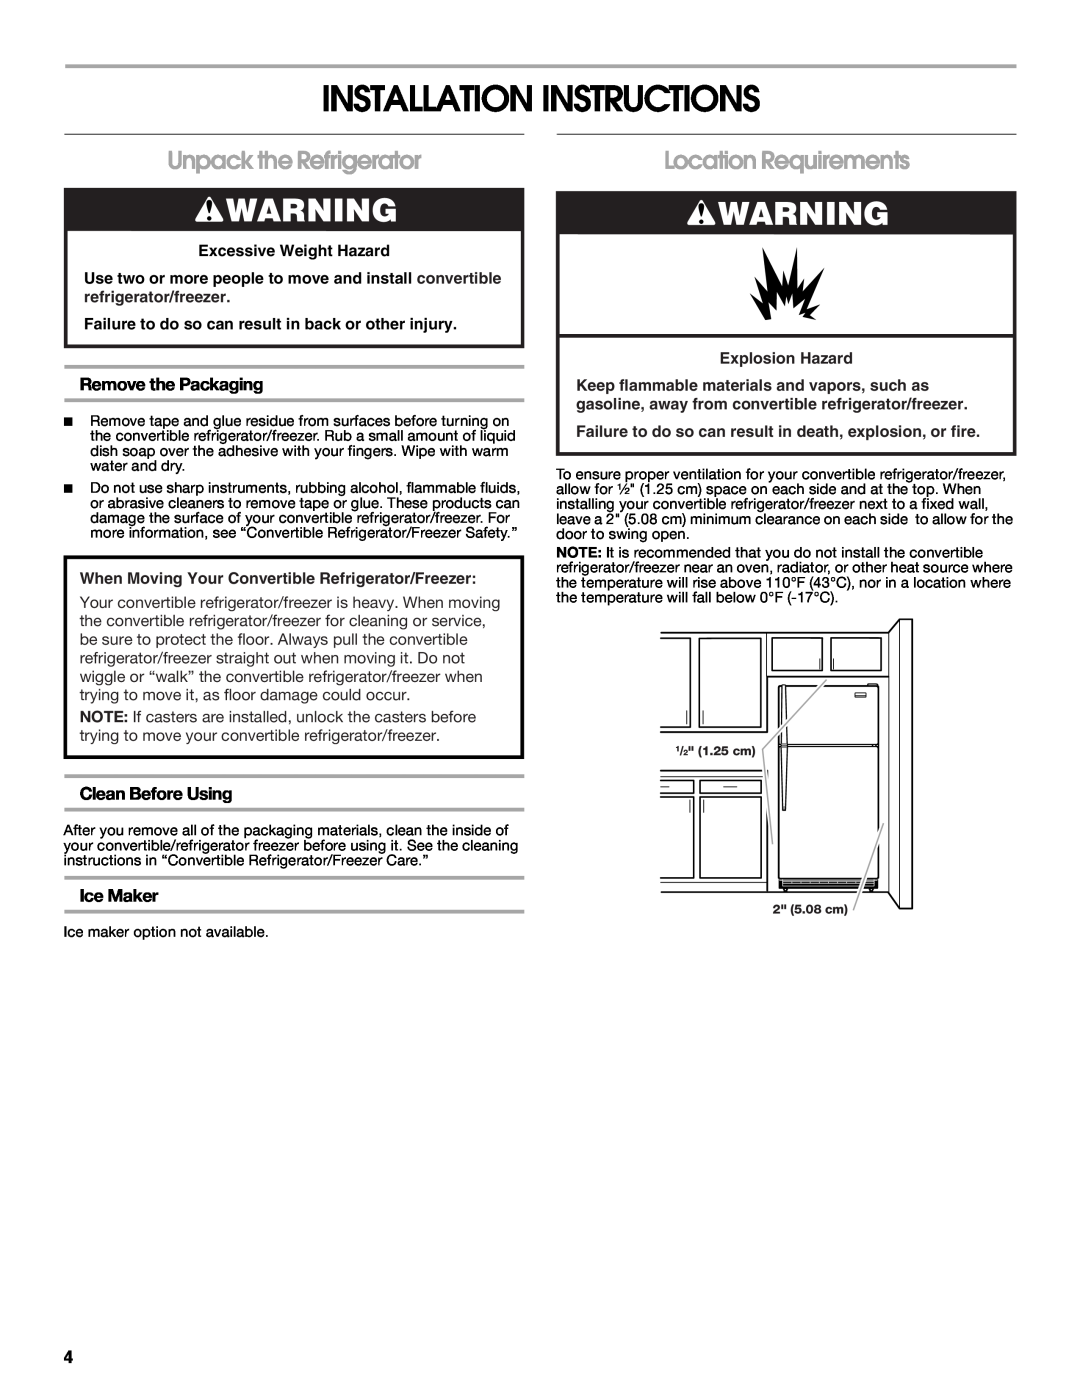 Whirlpool 2314466 manual Installation Instructions, Unpack the Refrigerator, Location Requirements, Remove the Packaging 